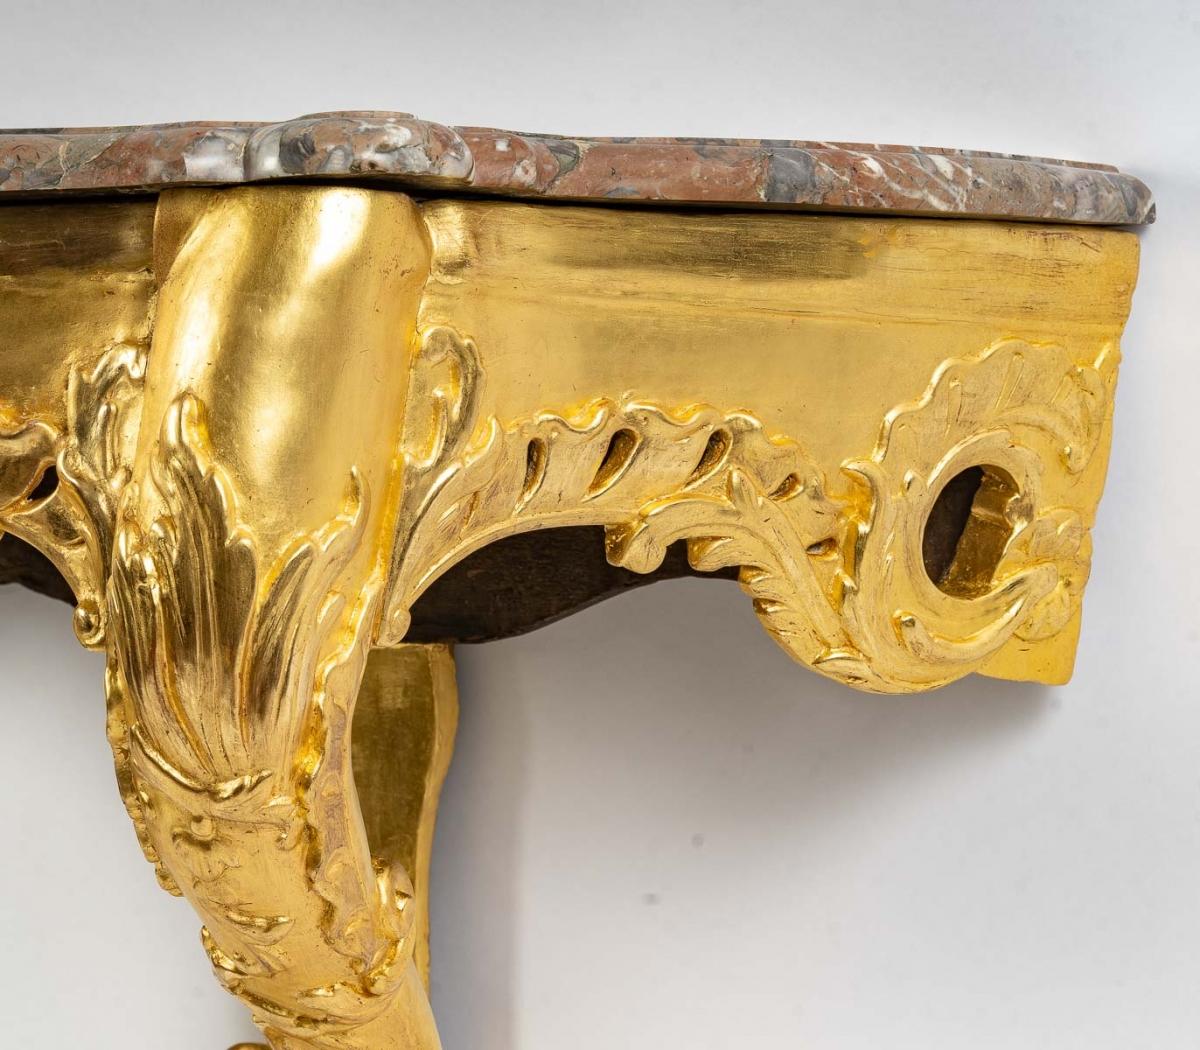 Gilded wood two legs console
Sumptuous Regency period two-legged console in gilded wood and richly carved.
The top is made of red marble from Flanders.
Period : Regency - First third of the 18th century.
Dimensions with marble : Height : 73,5cm